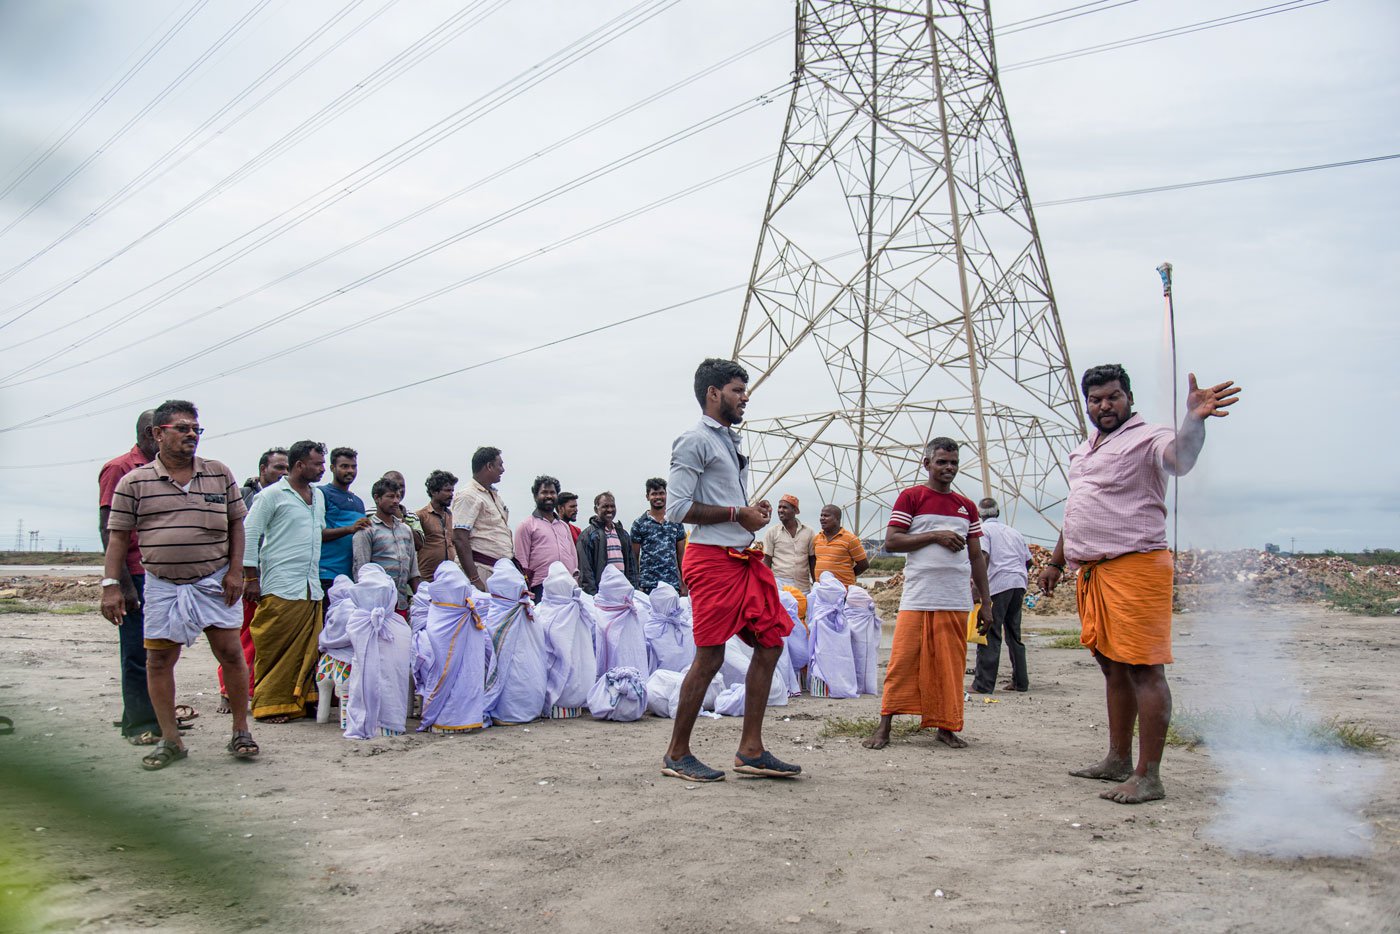 Crackers are burst as part of the ritual of returning with Kannisamy idols to their villages.